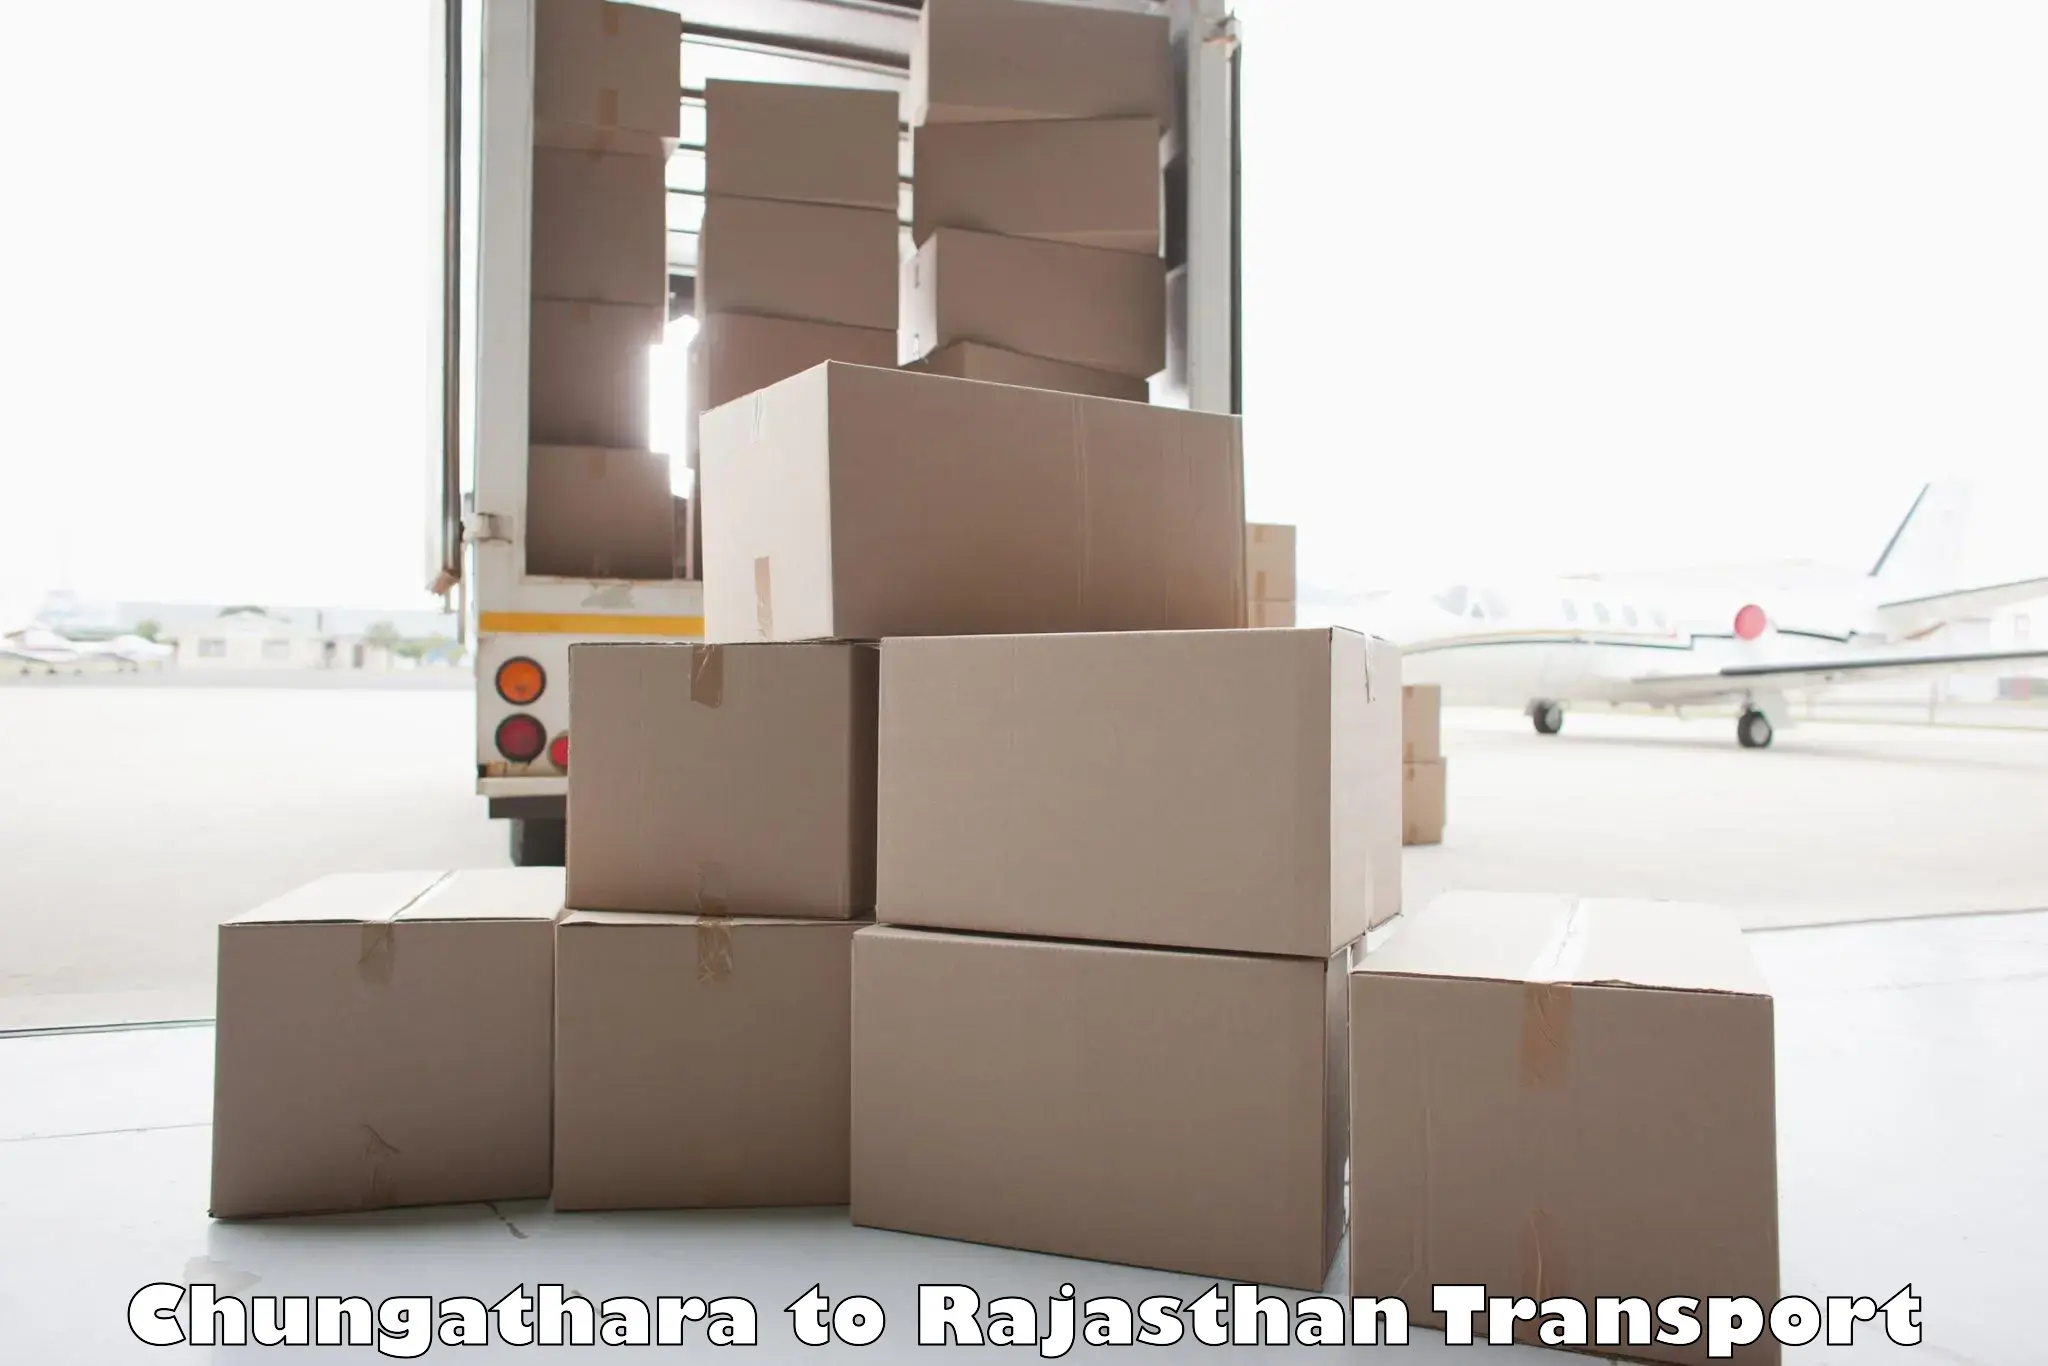 Container transport service Chungathara to Anupgarh